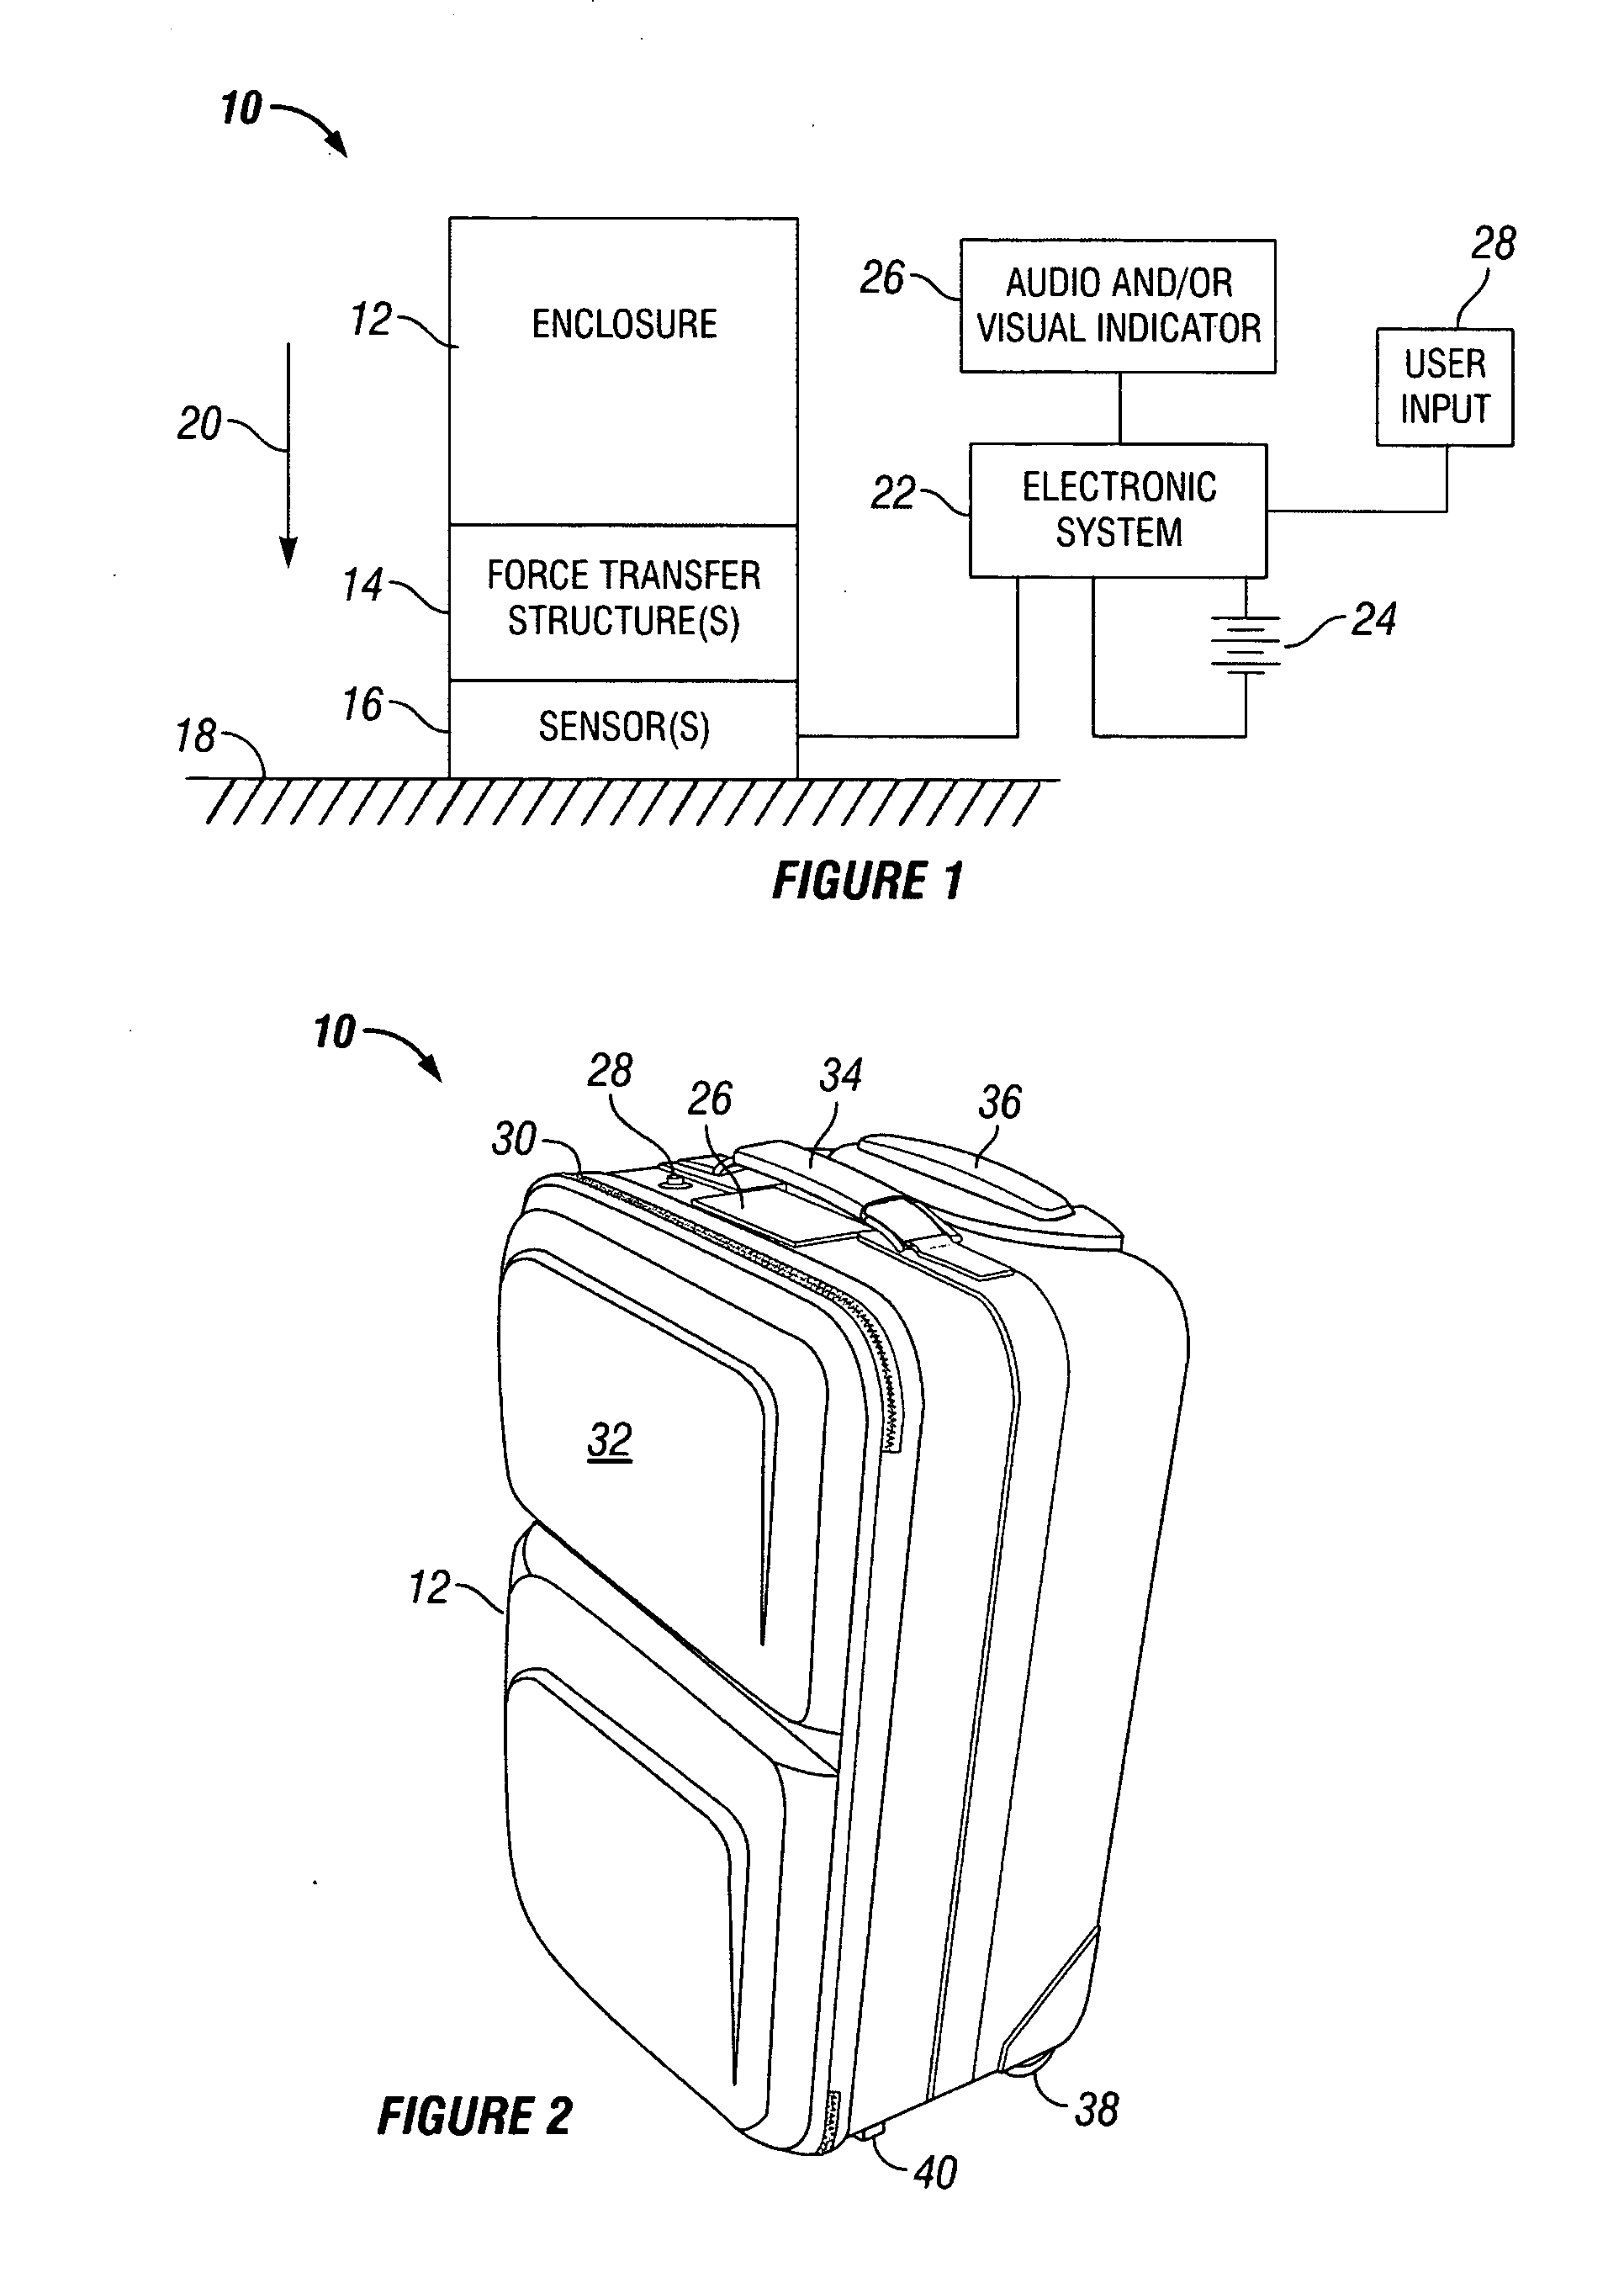 Carrying case with integrated electronics system